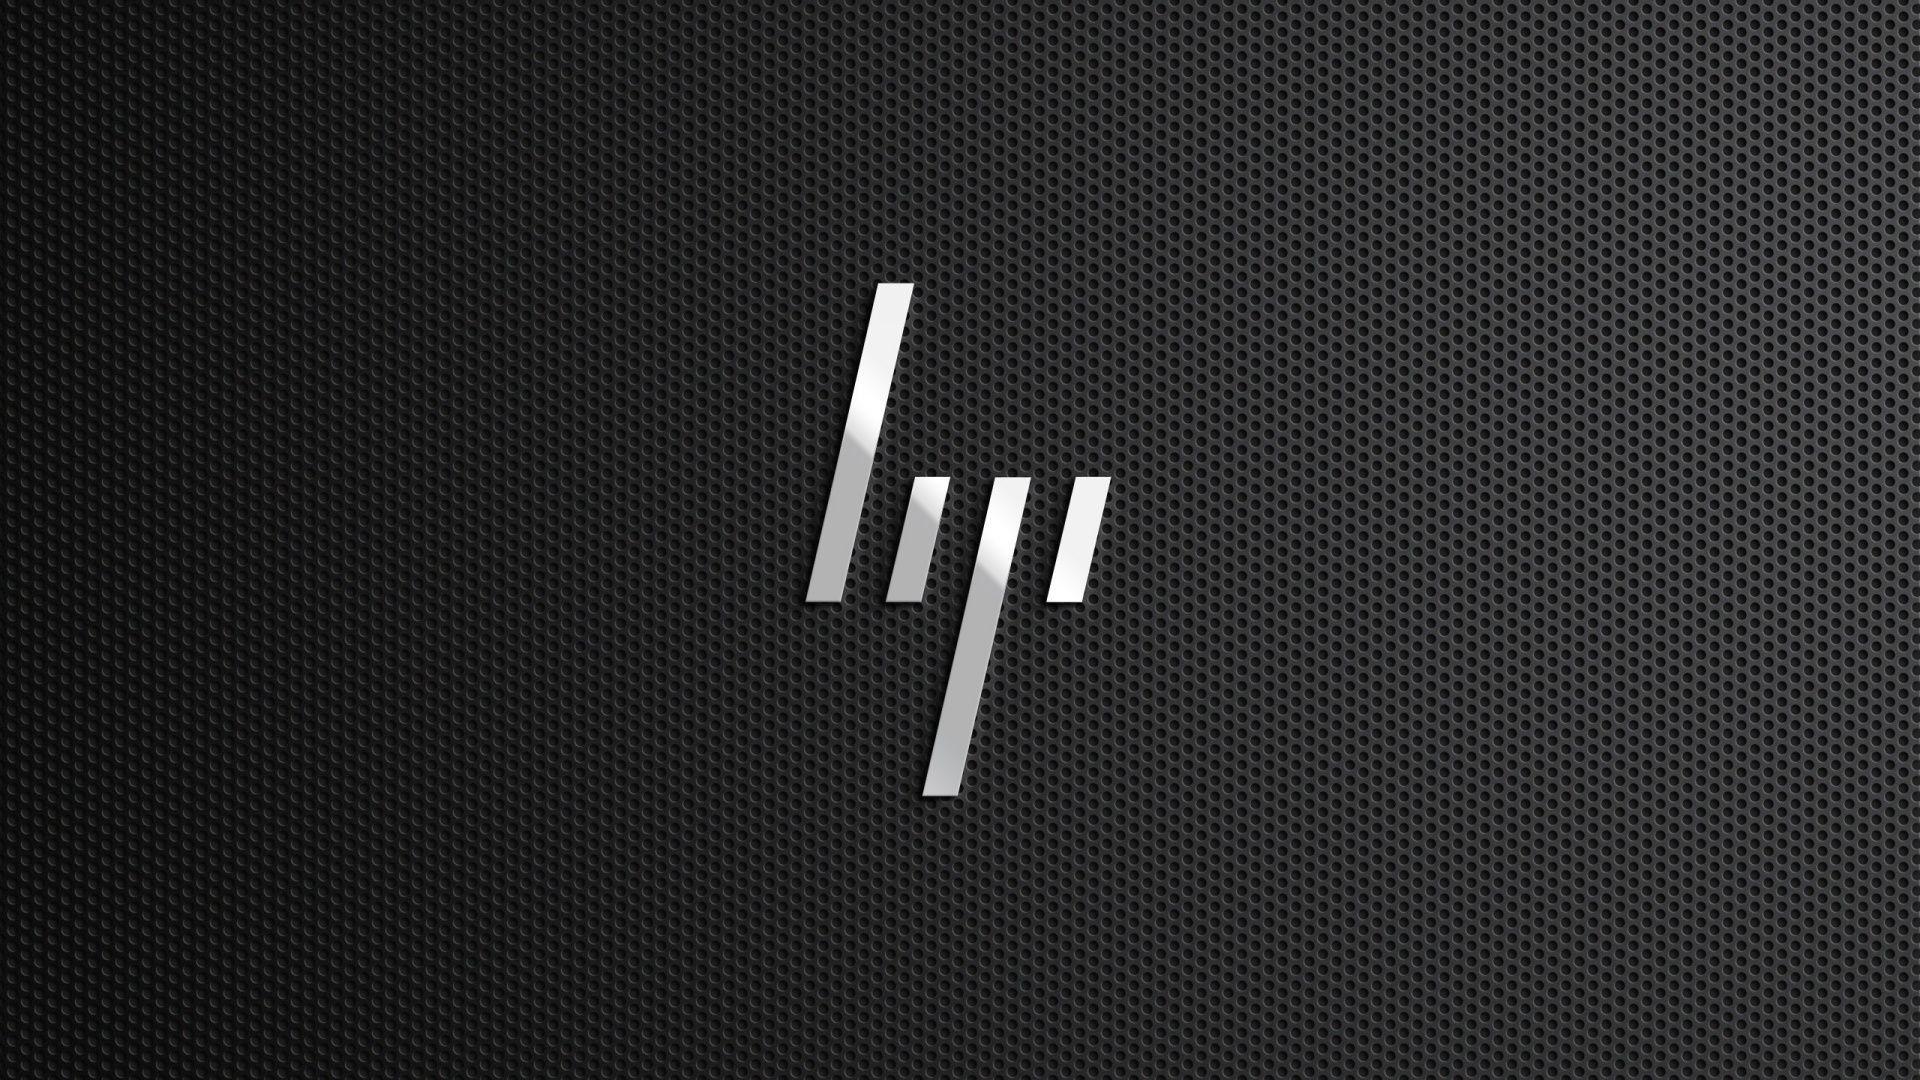 HP Spectre Logo - 63+ Hp Spectre Wallpapers on WallpaperPlay